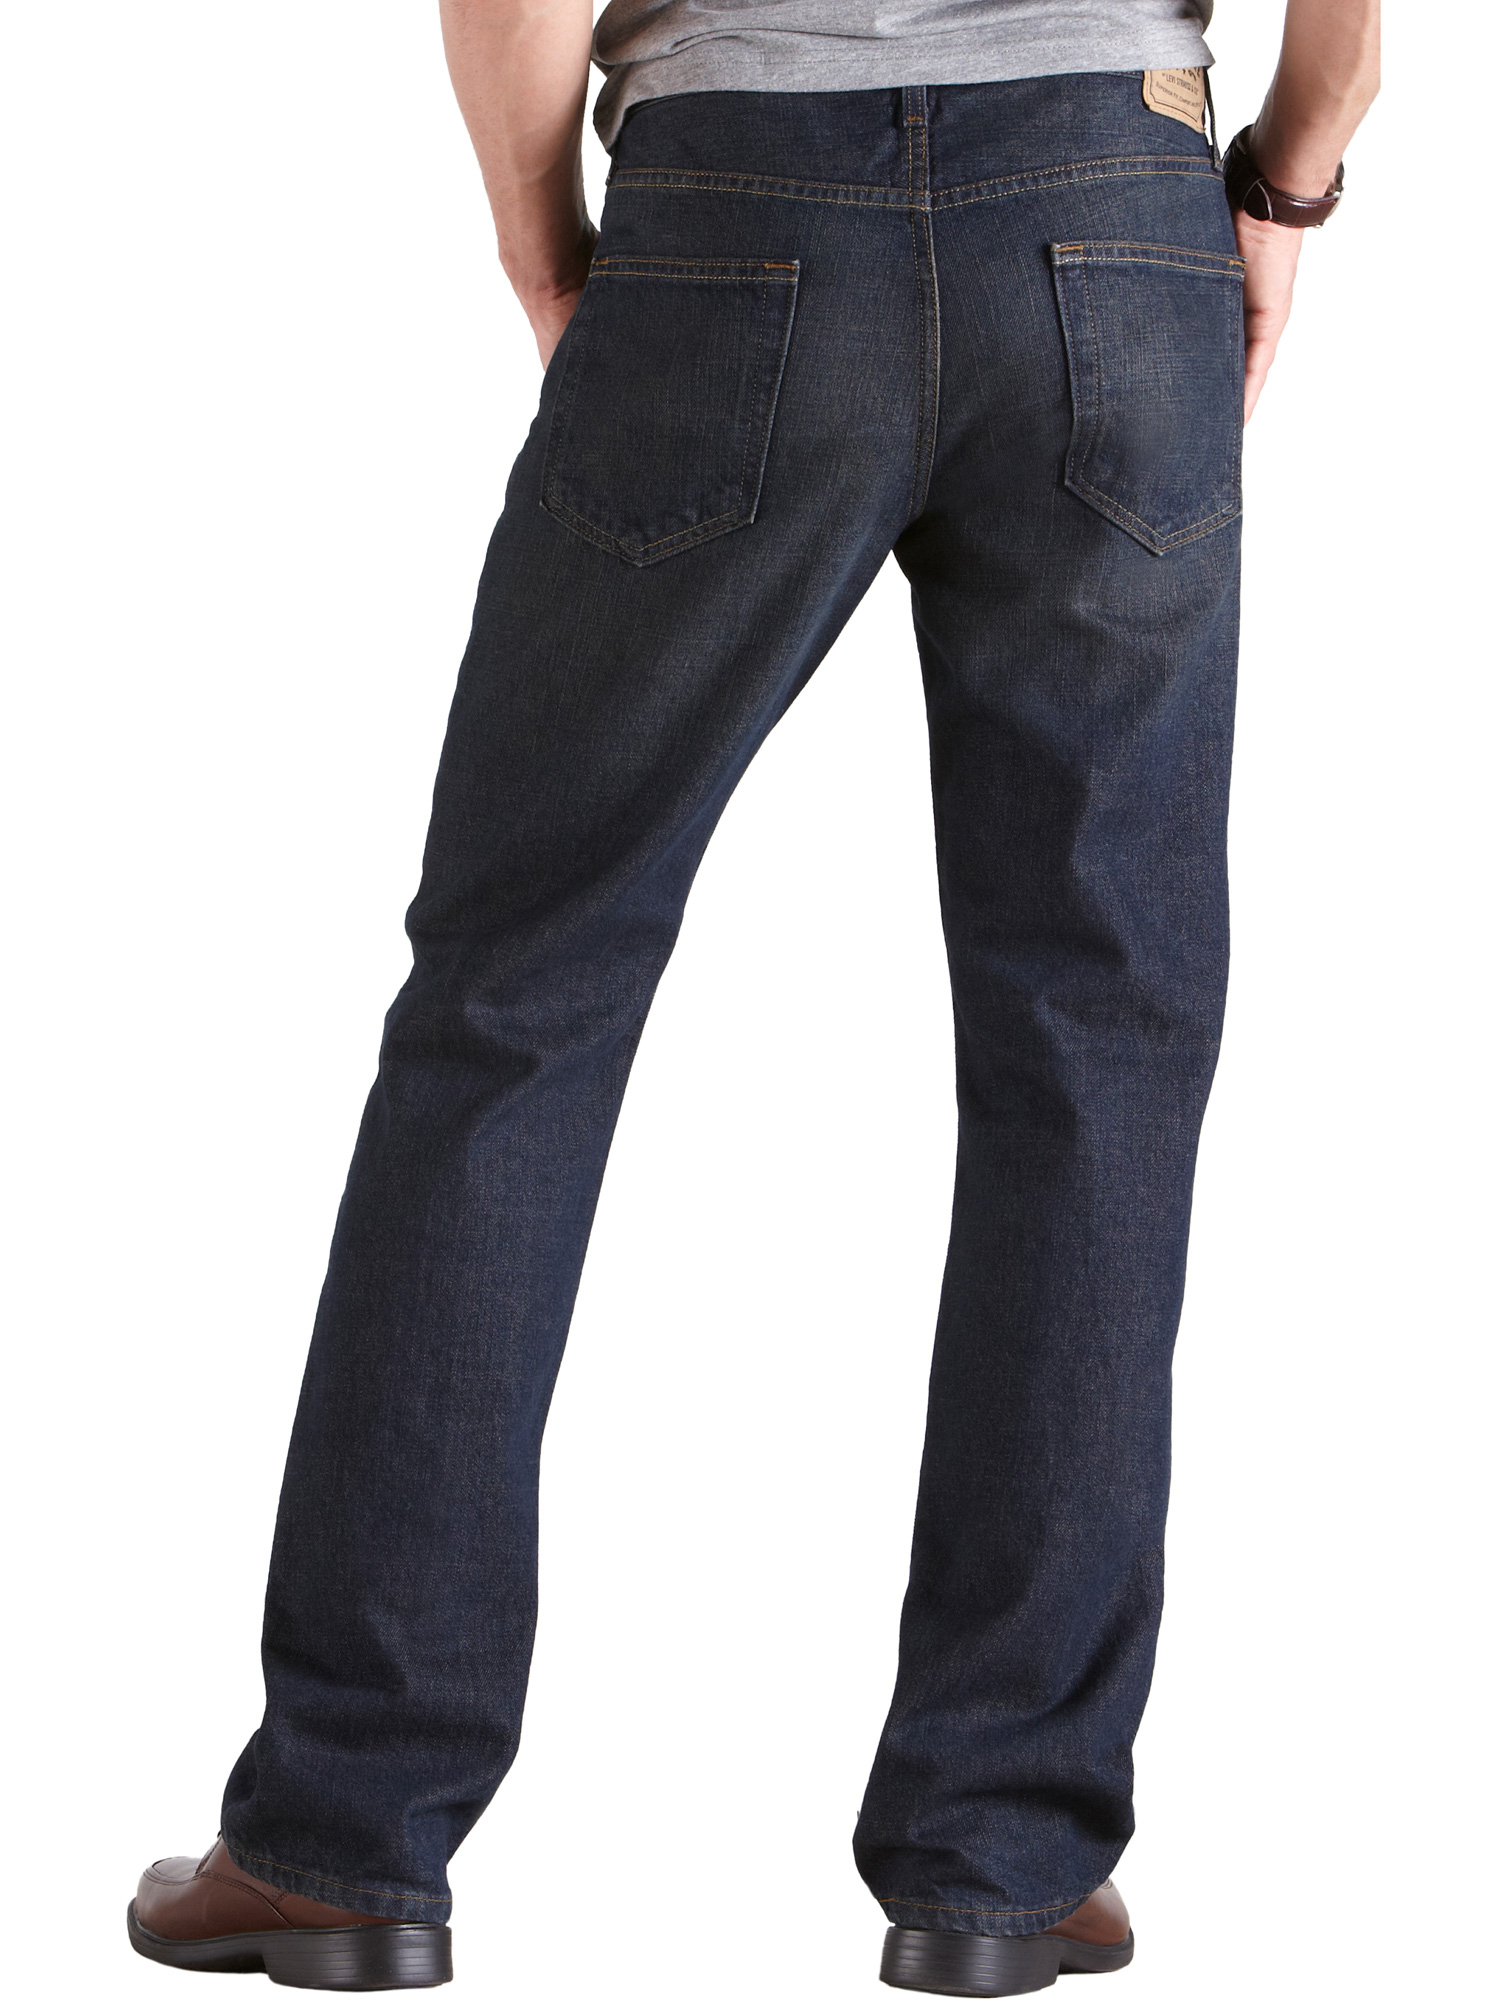 Signature By Levi Strauss & Co. Men's Straight Fit Jeans - image 4 of 4